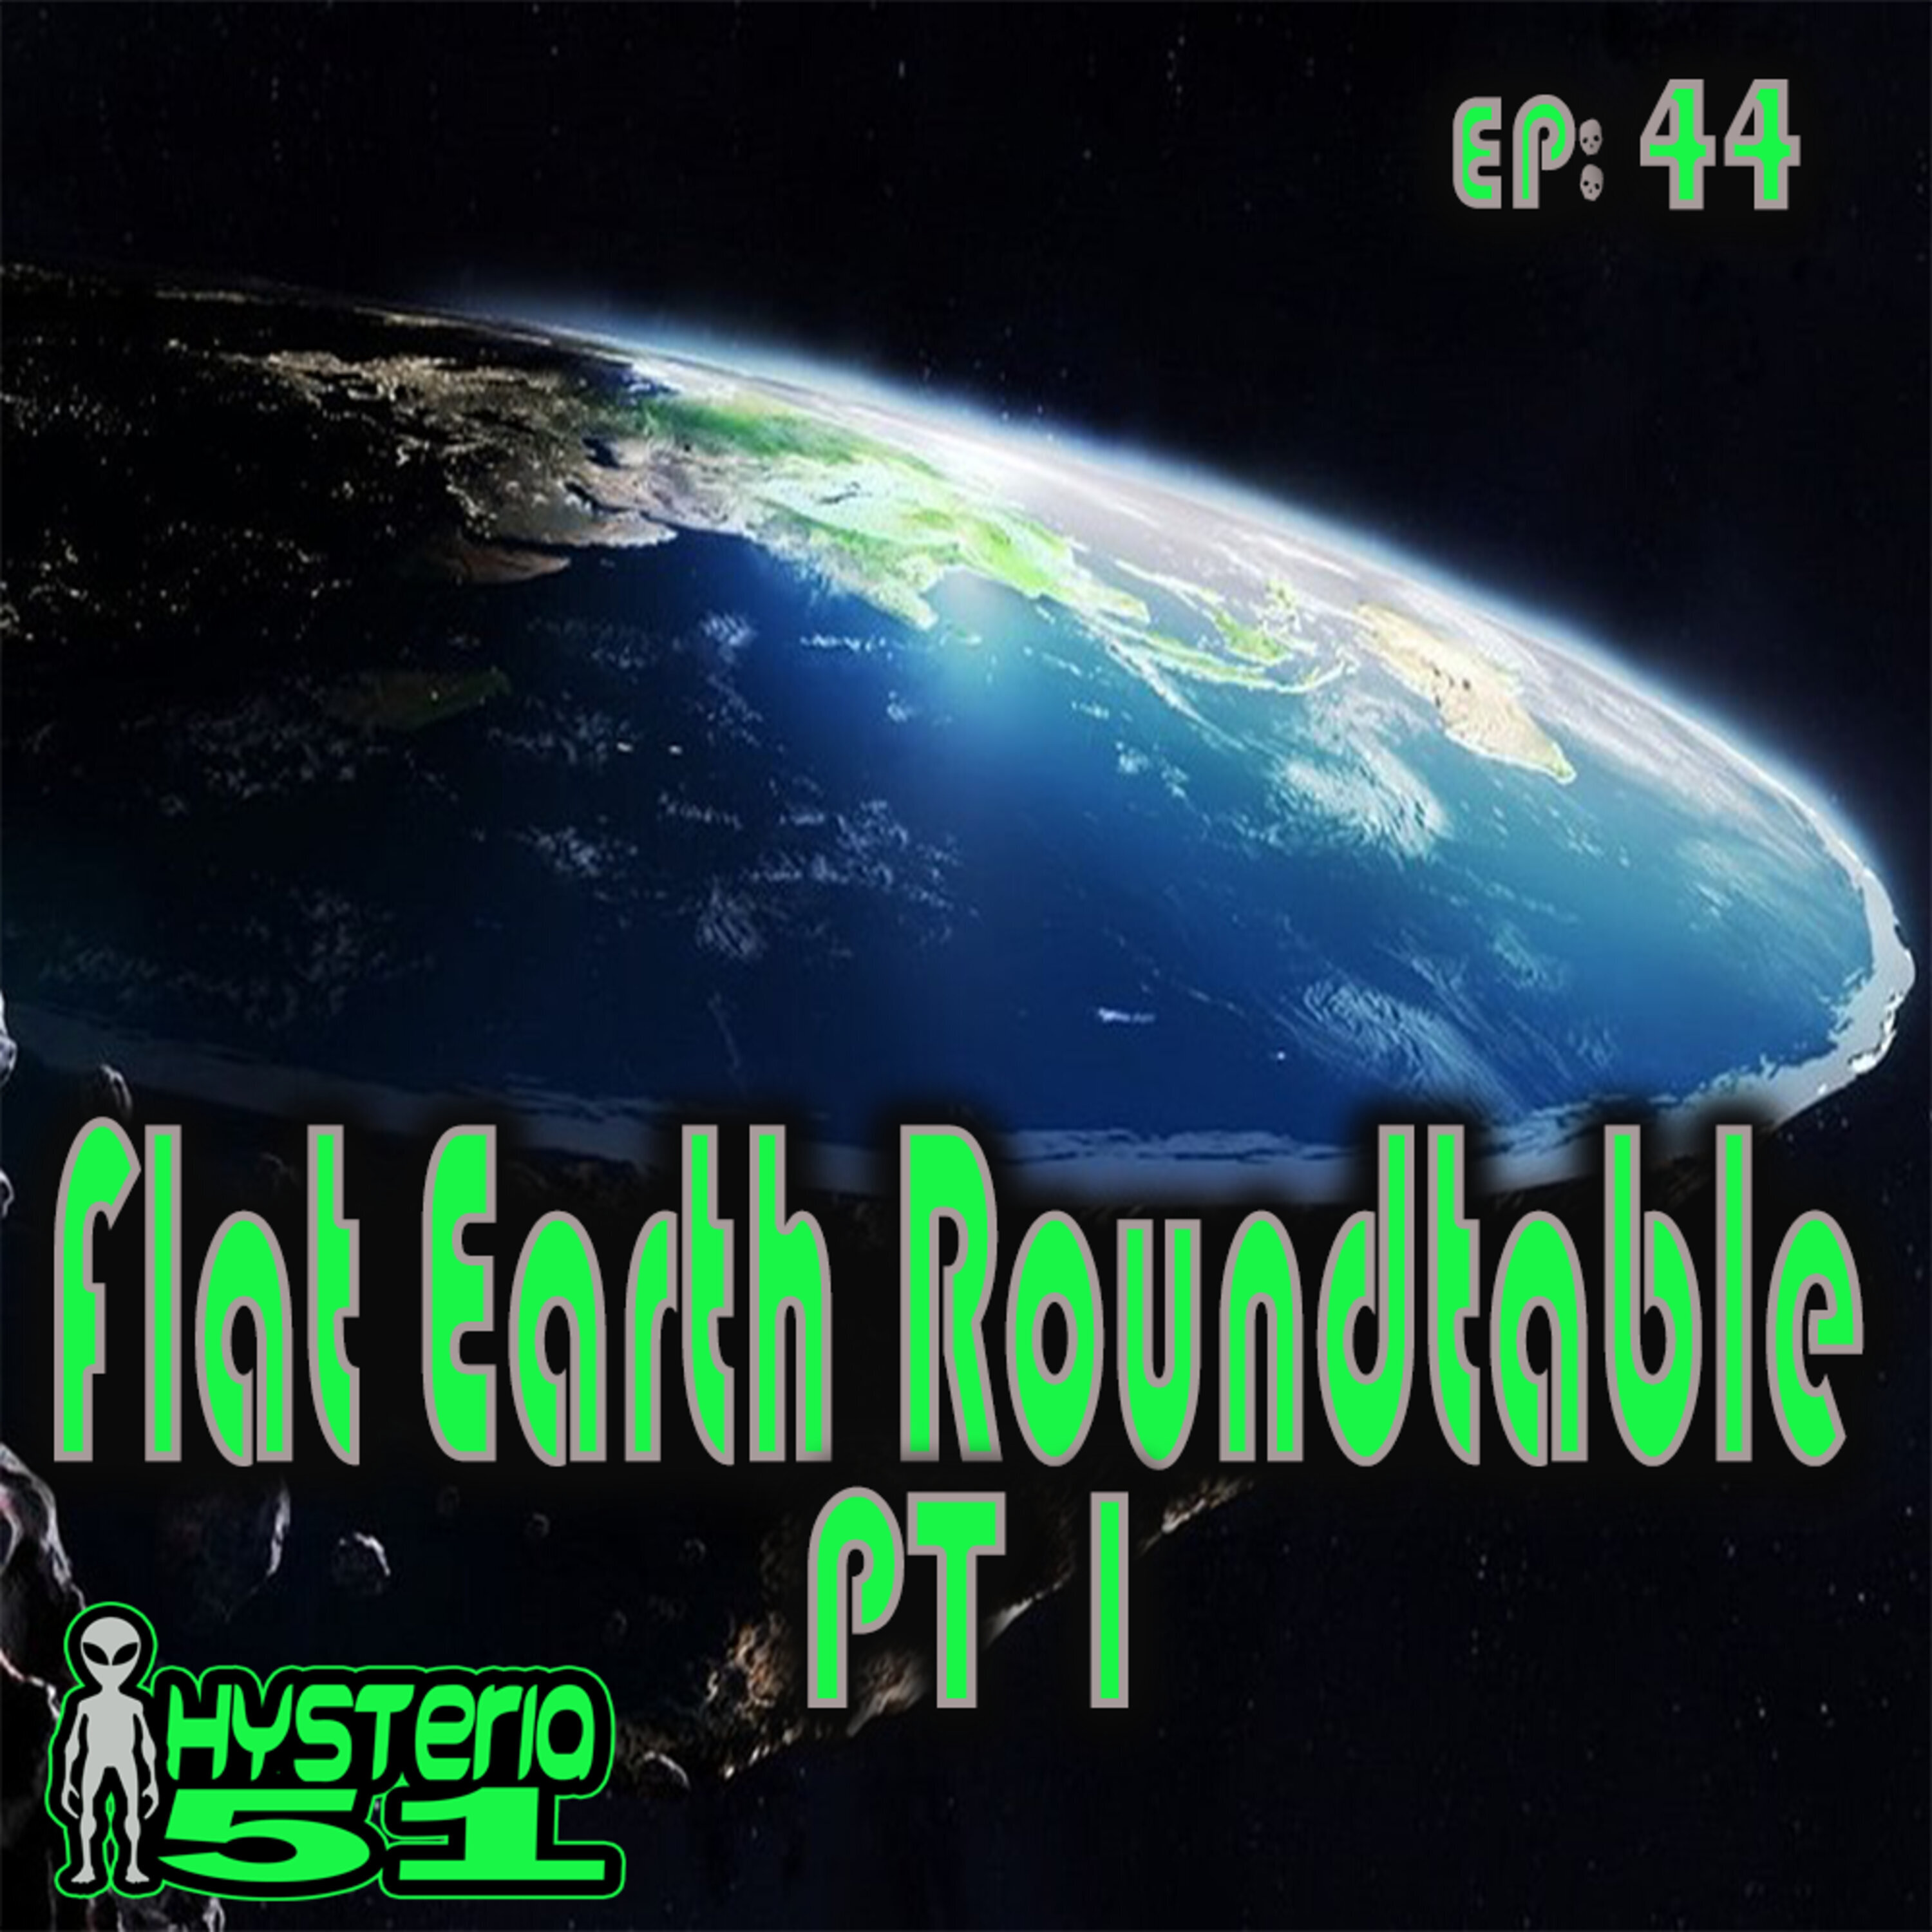 Flat Earth Roundtable pt 1 | 44 Image